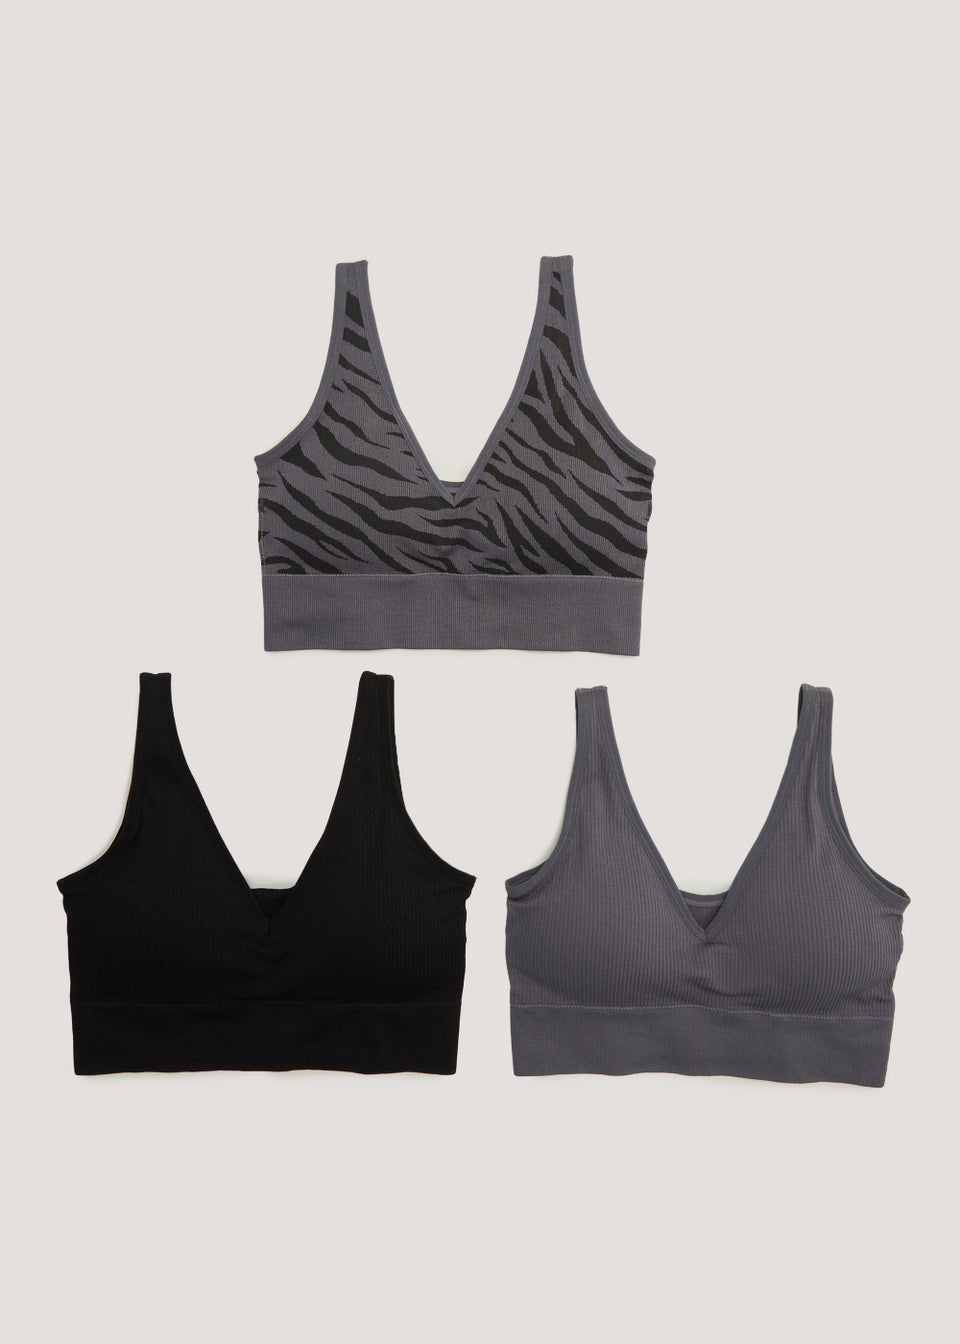 Matalan Pack of 3 Bralet Bras. Rs.4500 To place online orders pls